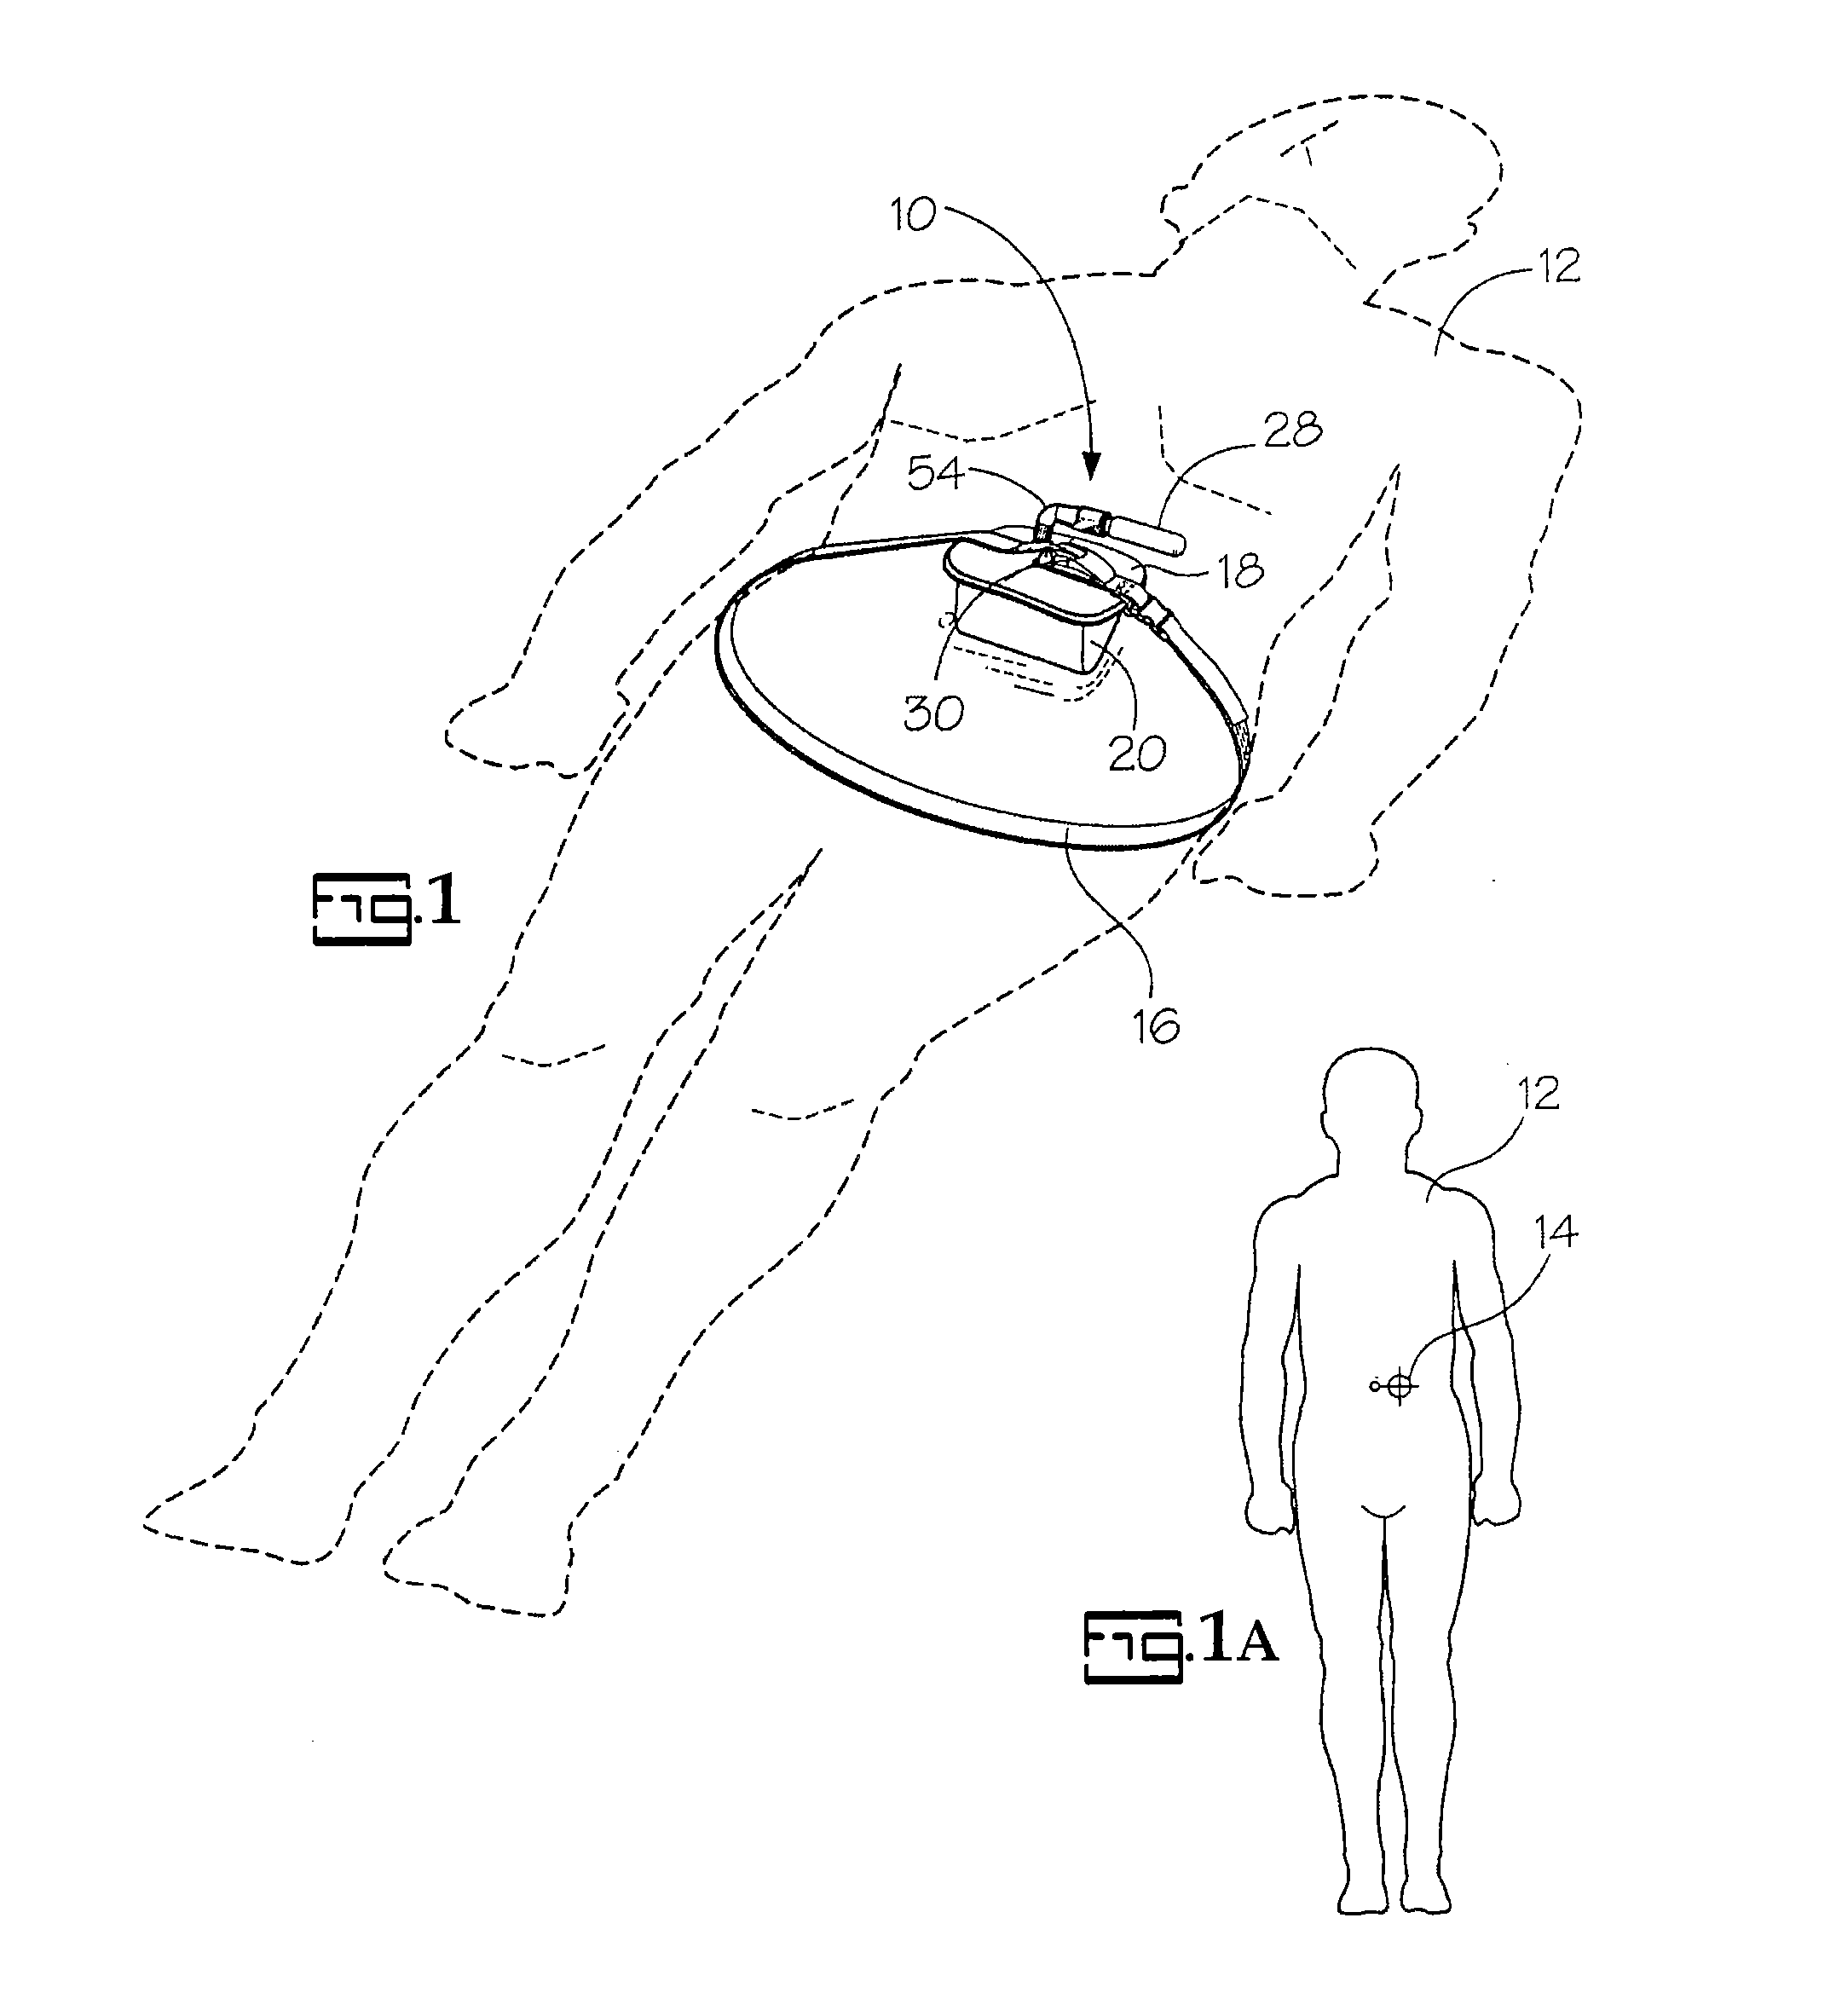 Portable pneumatic abdominal aortic compression system